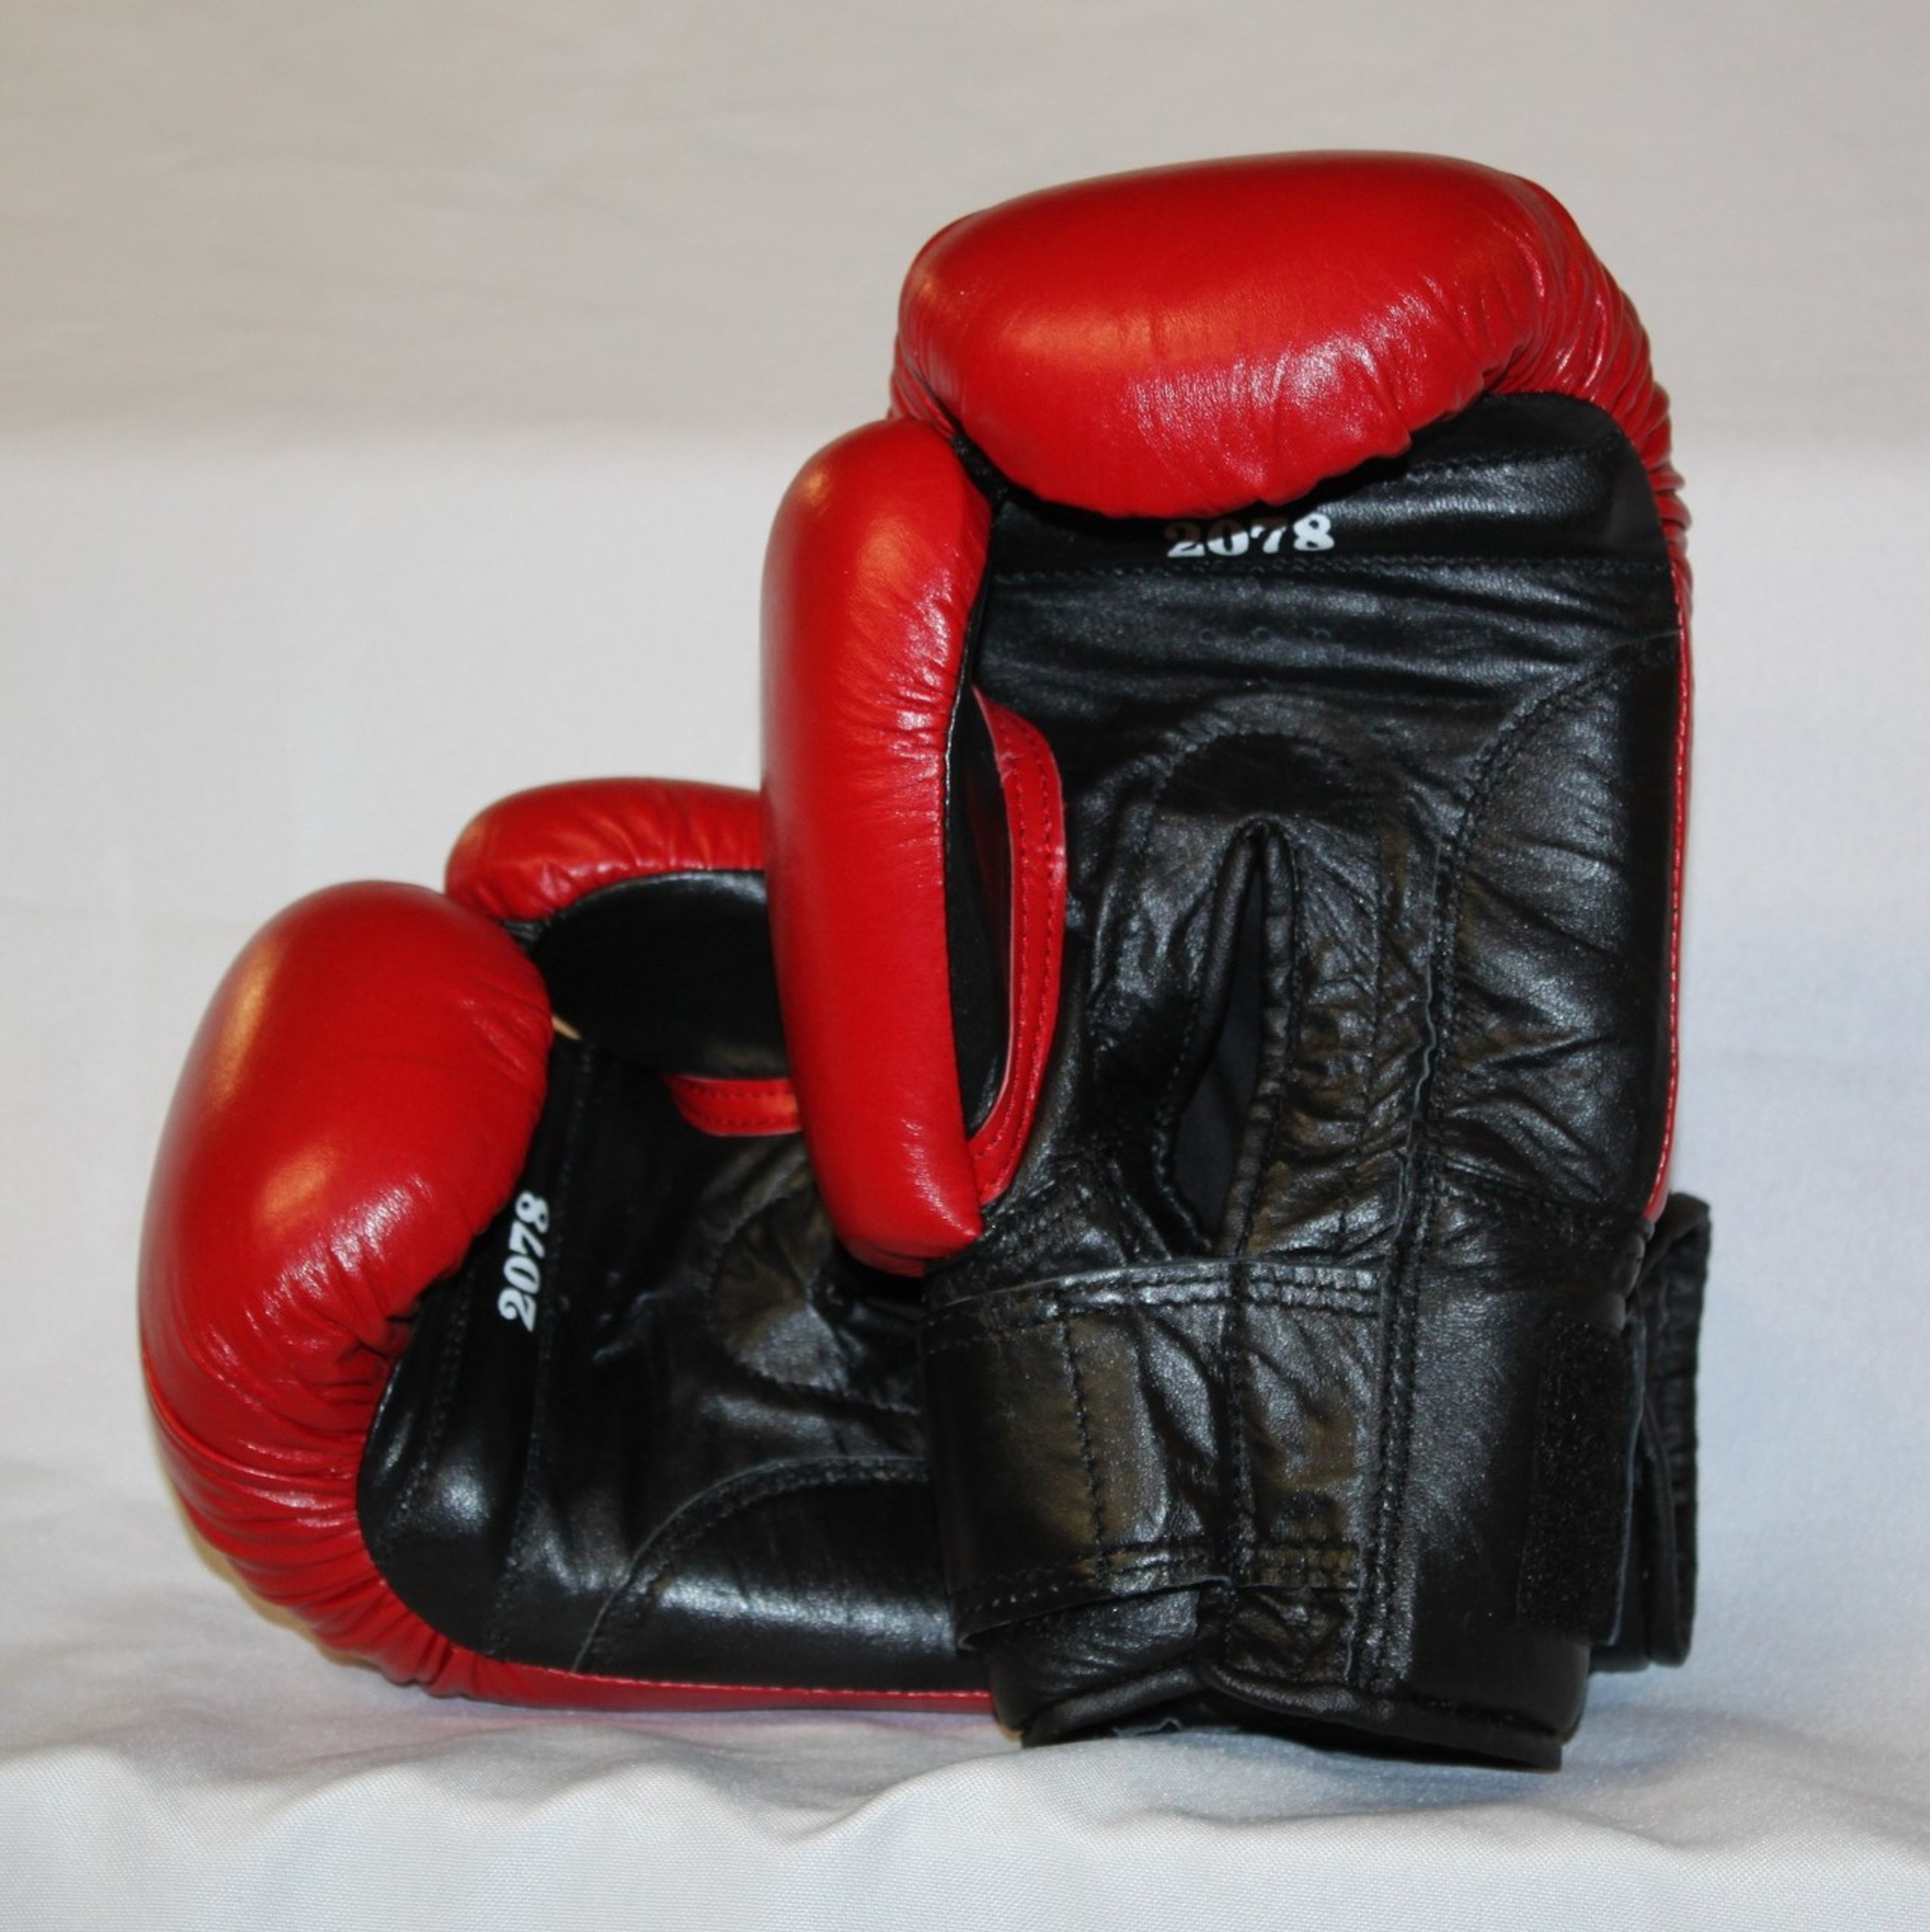 EVERLAST Boxing TRAINING GLOVES 8 oz leather - red - Hollywood Filane